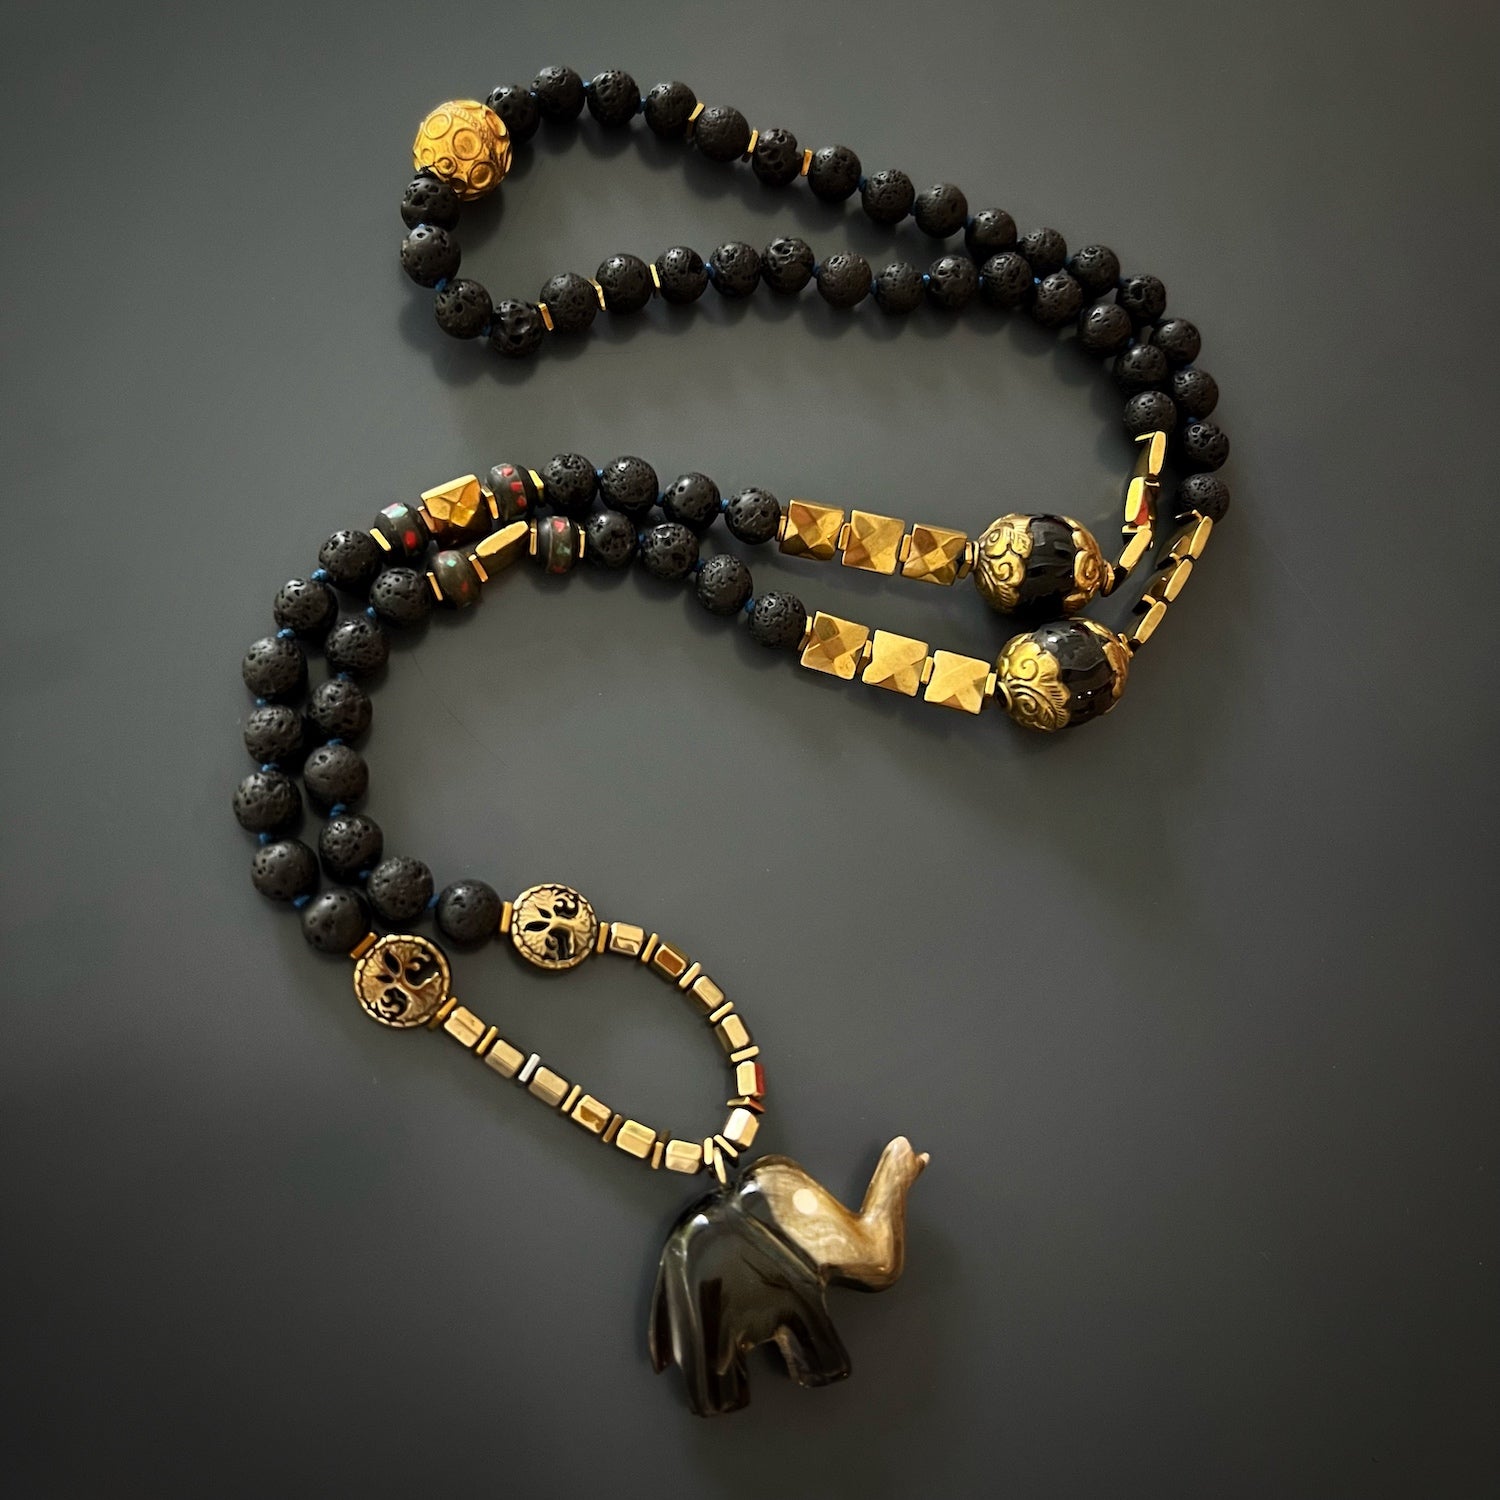 Experience the grounding energy of the Spiritual Nepal Elephant Necklace, featuring lava rock and hematite beads